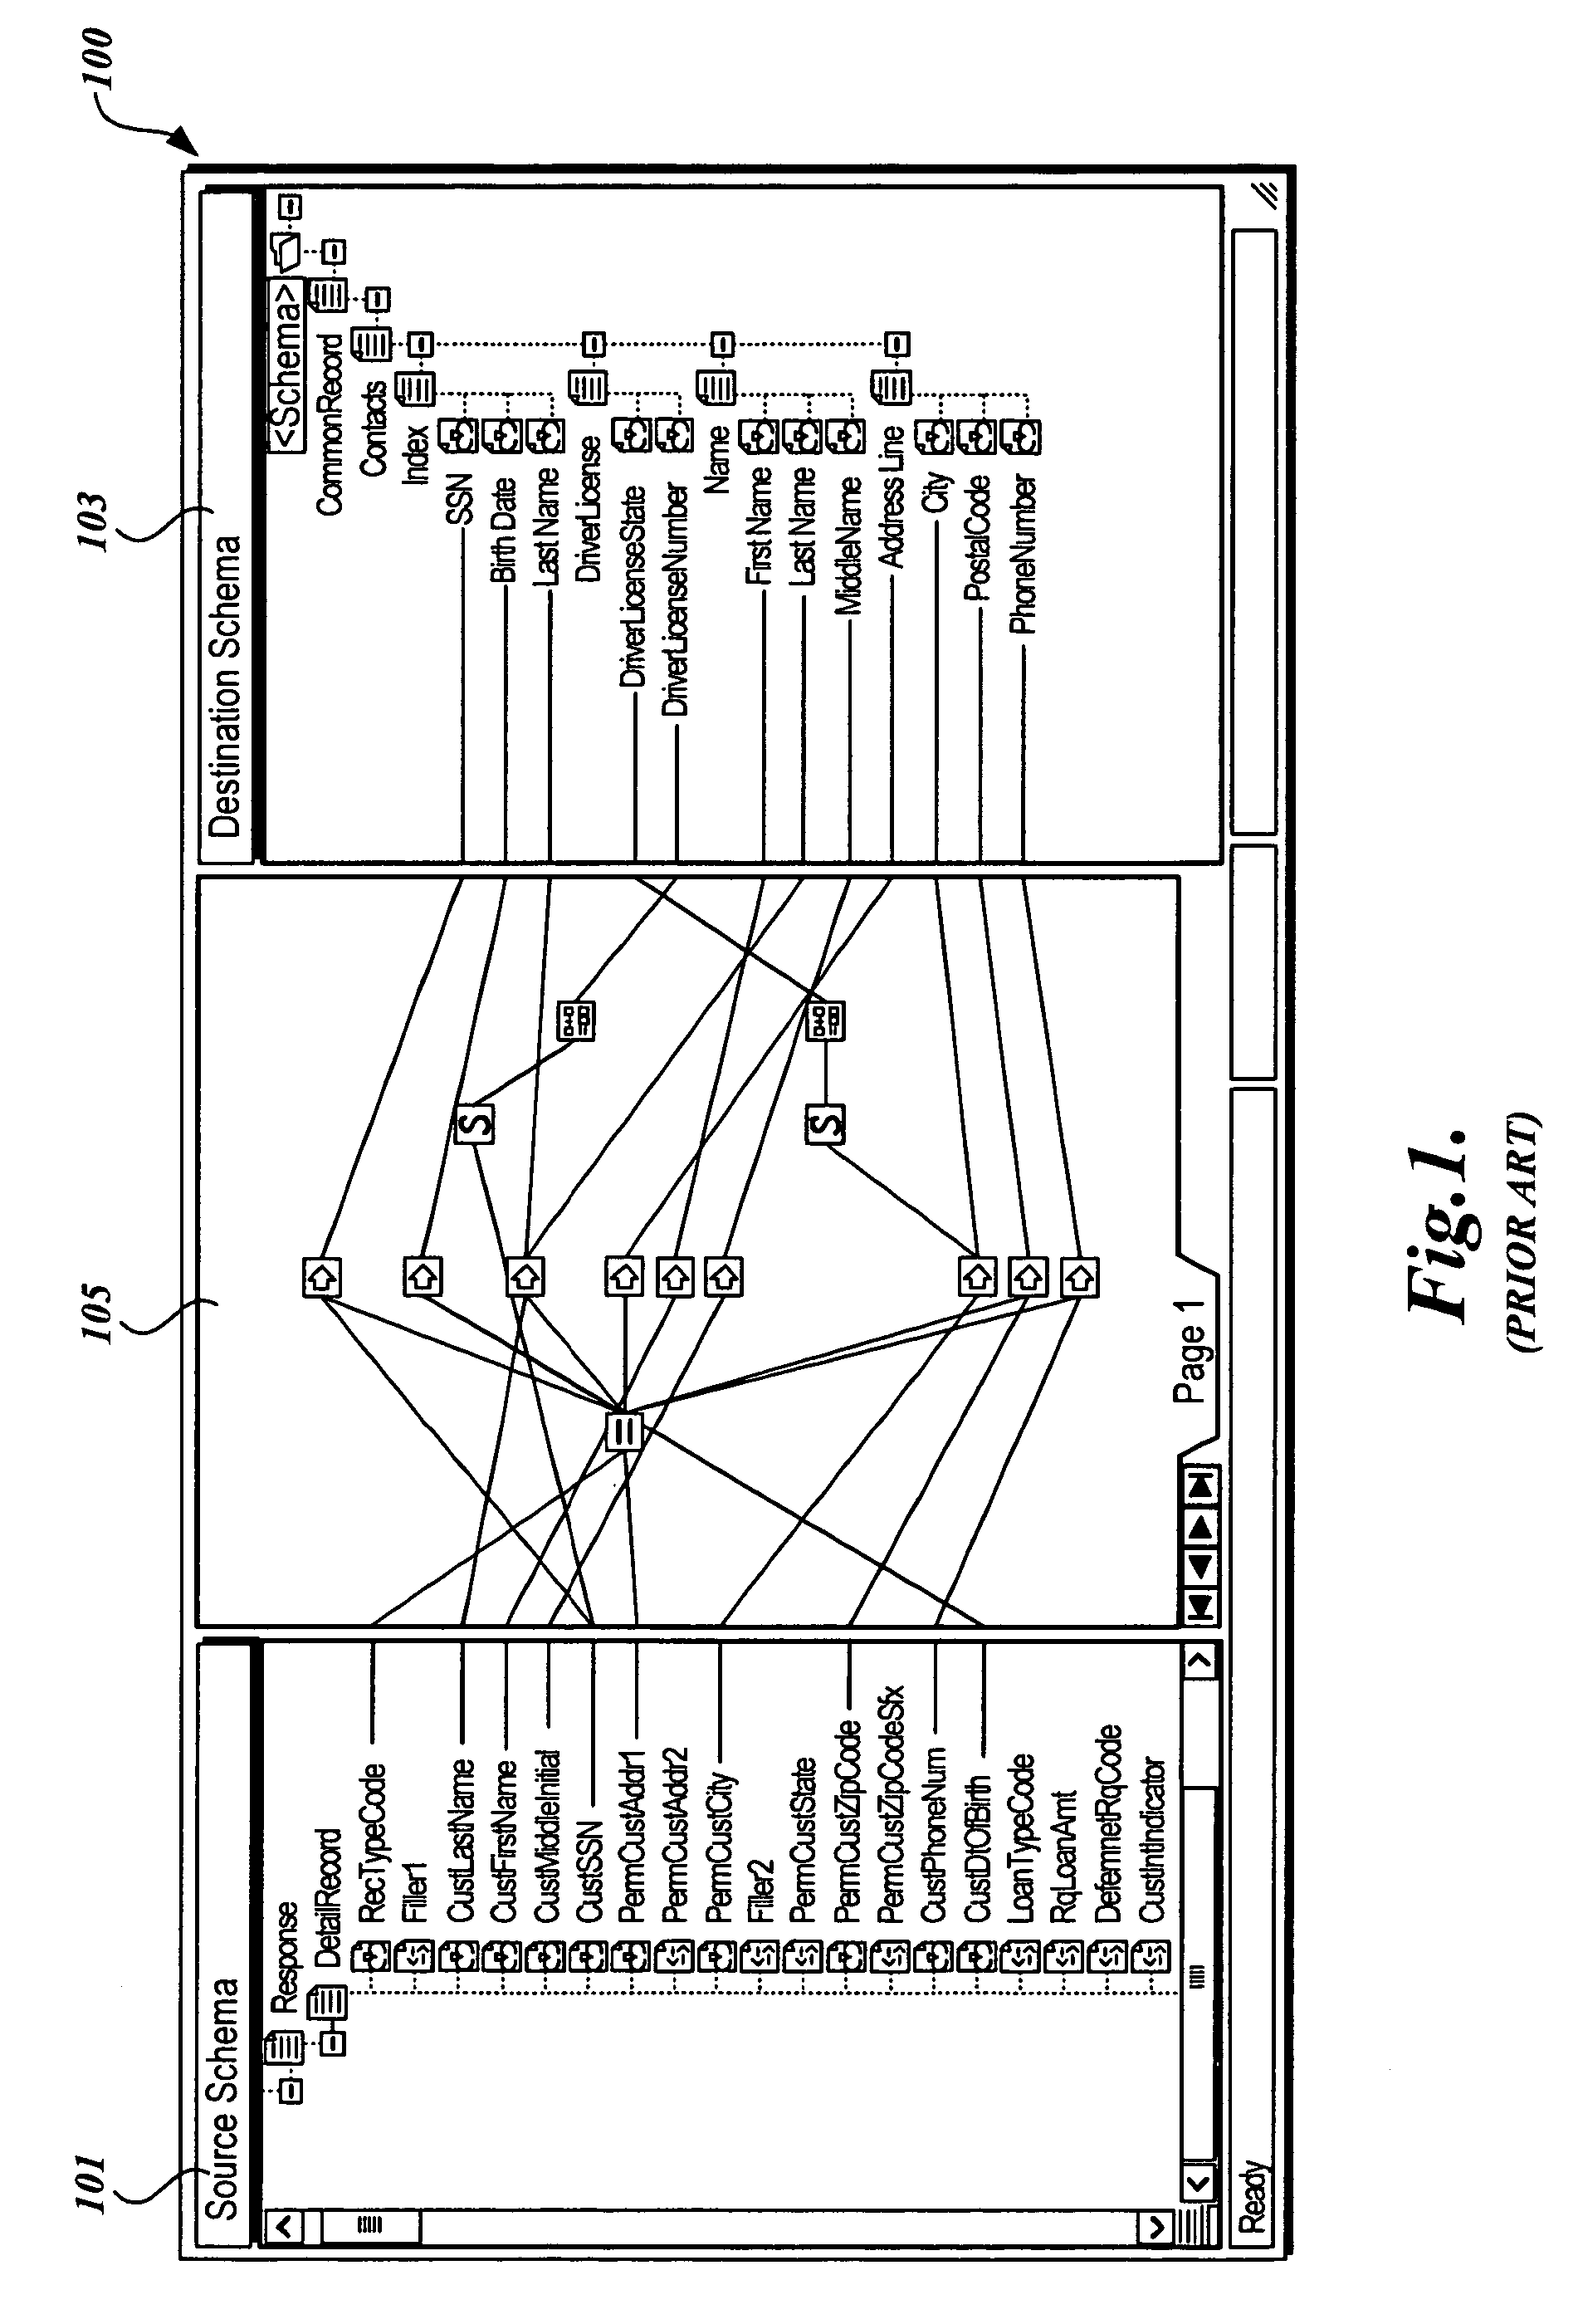 Method for displaying a visual representation of mapping between a source schema and a destination schema emphasizing visually adjusts the objects such that they are visually distinguishable from the non-relevant and non-selected objects